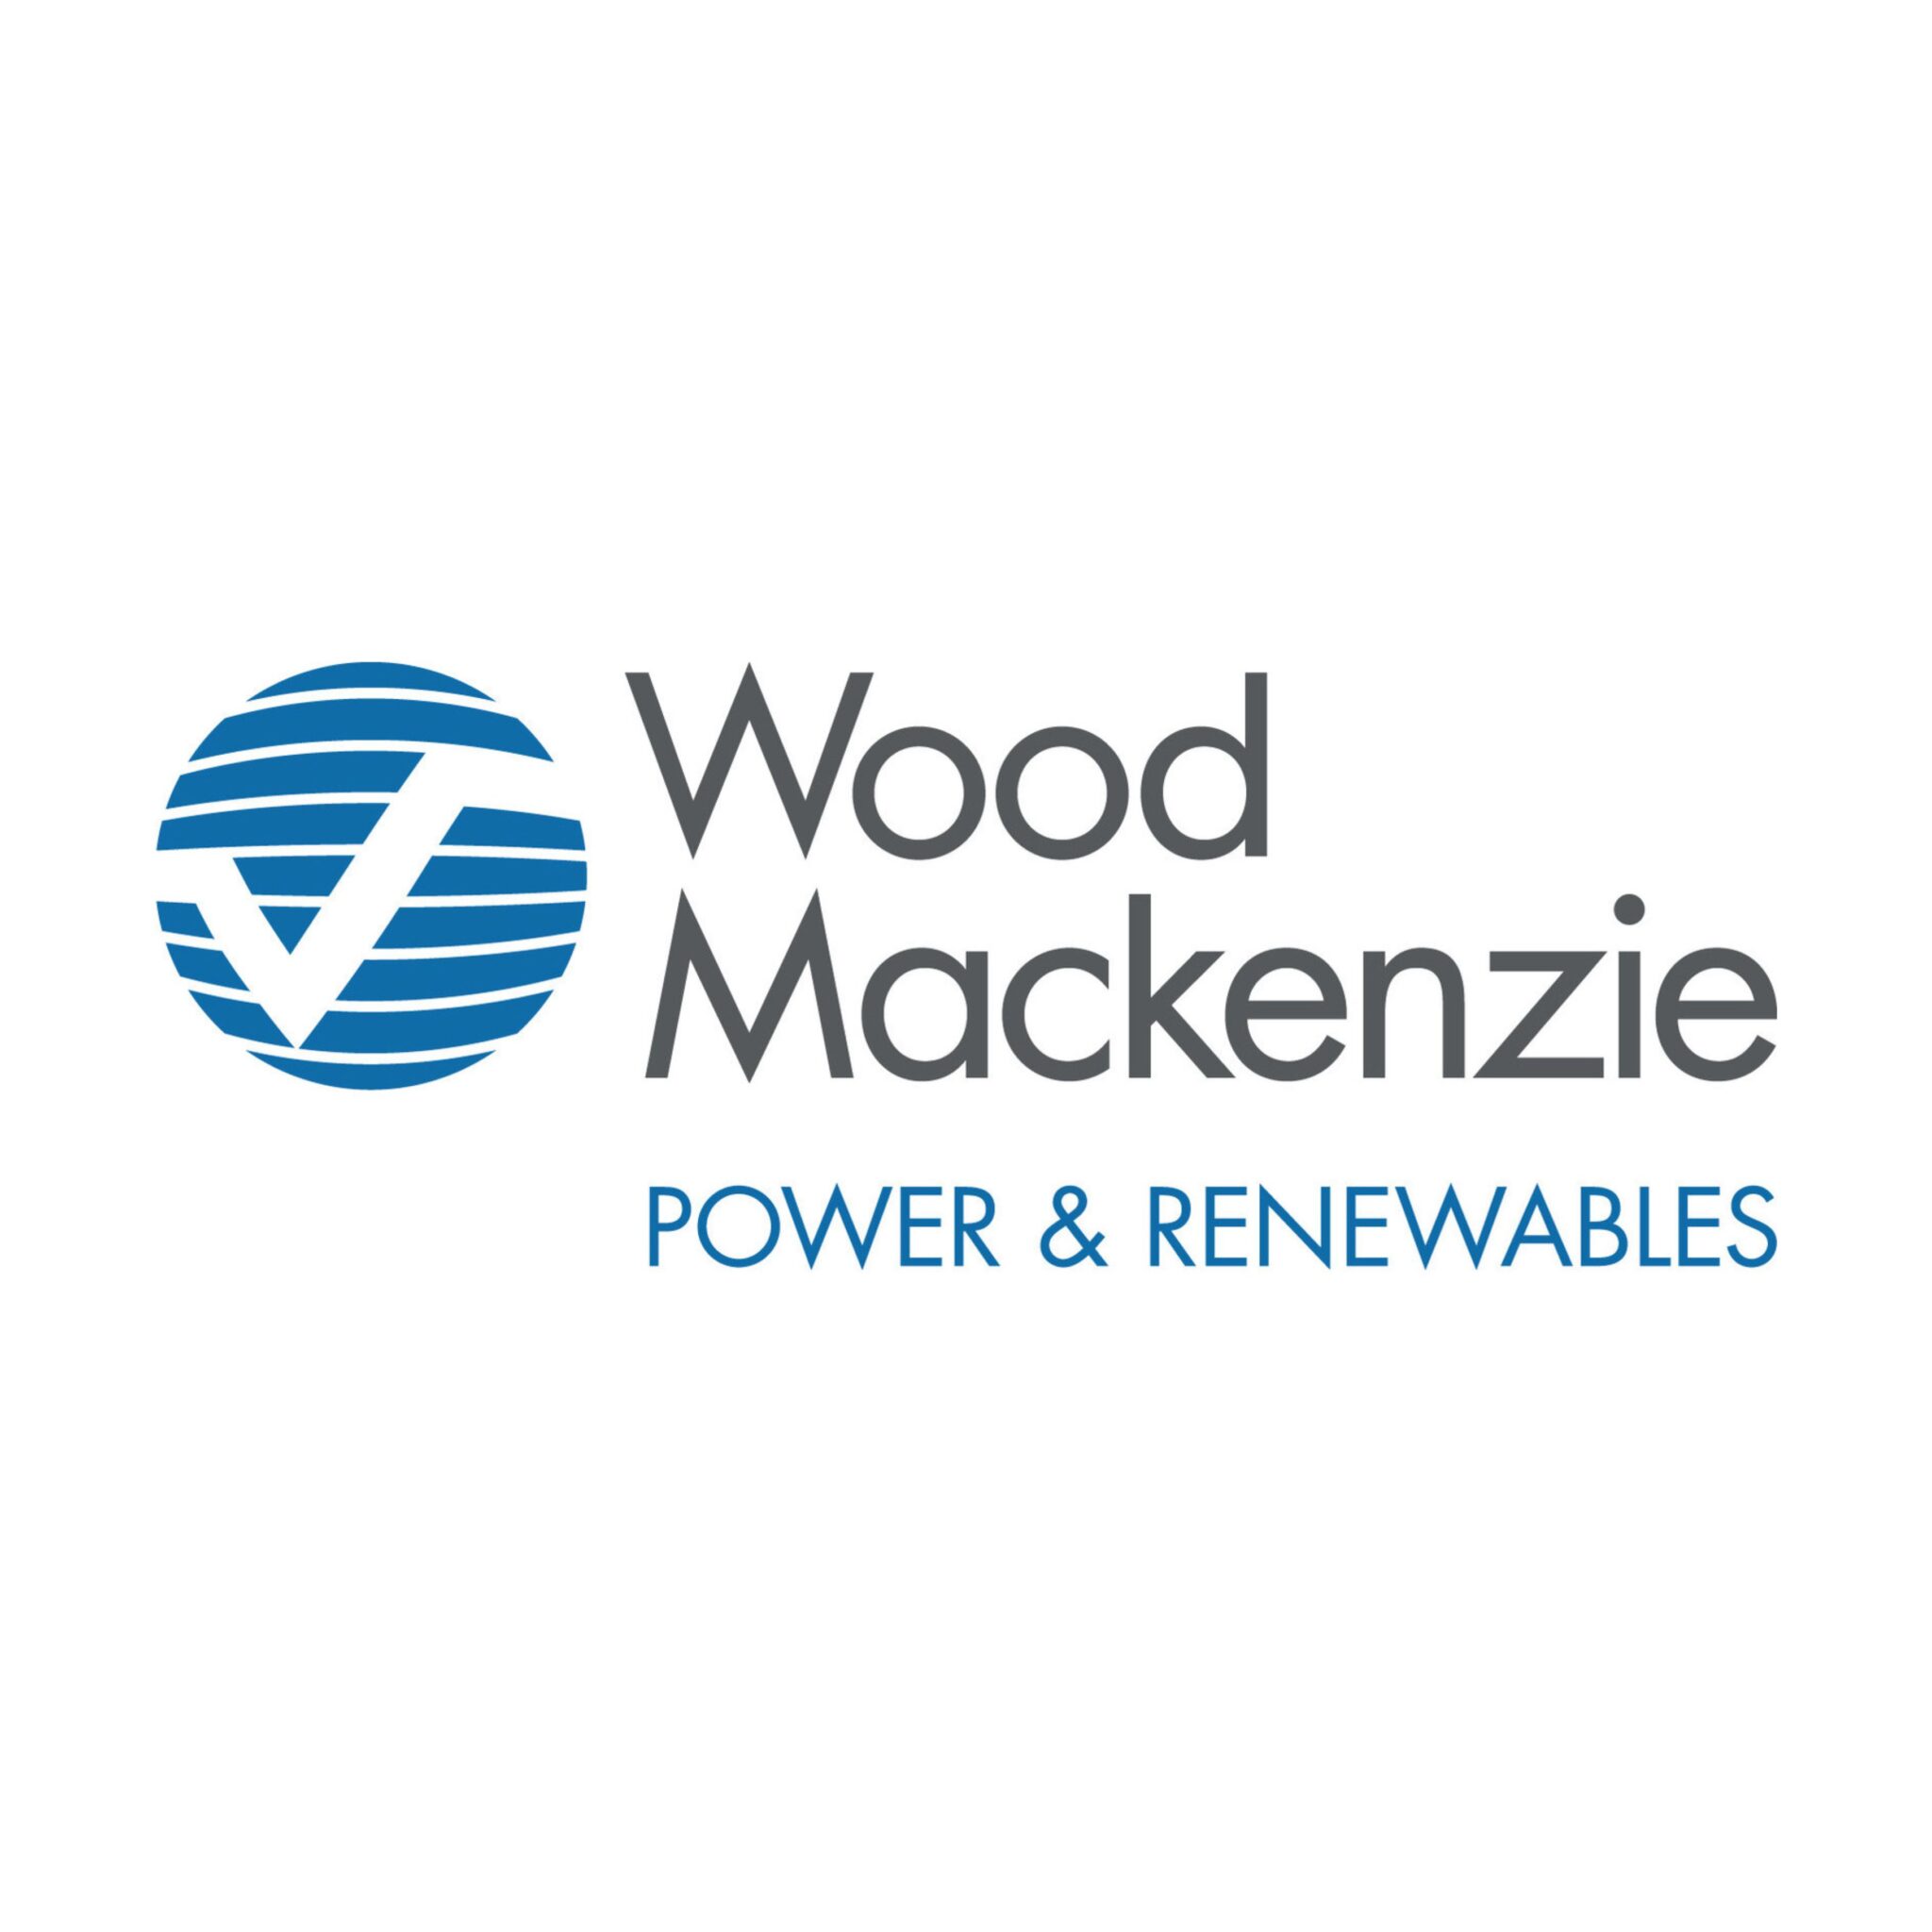 Wood Mackenzie Launches the Electric Vehicles and Battery Supply Chain